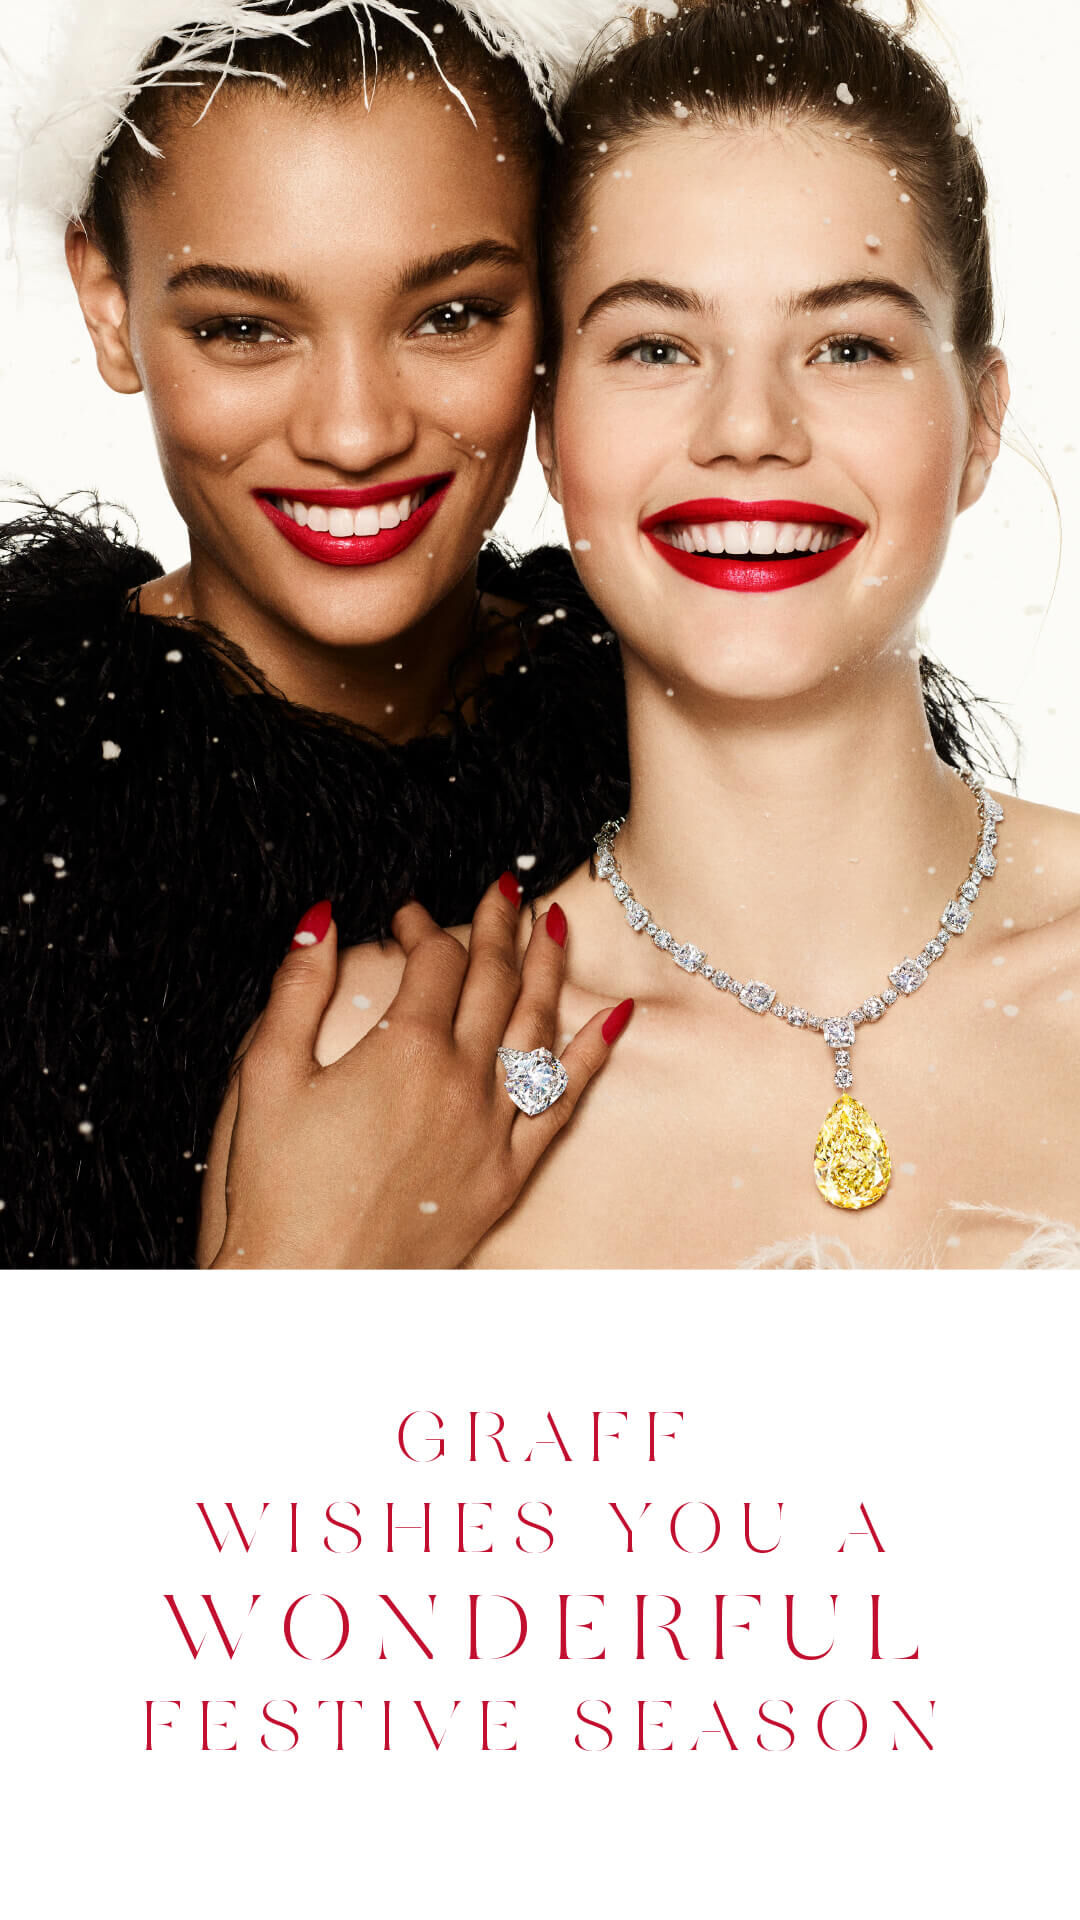 Two model wearing Graff diamond high jewellery with a 'Graff wishes you a wonderful festive season' quote